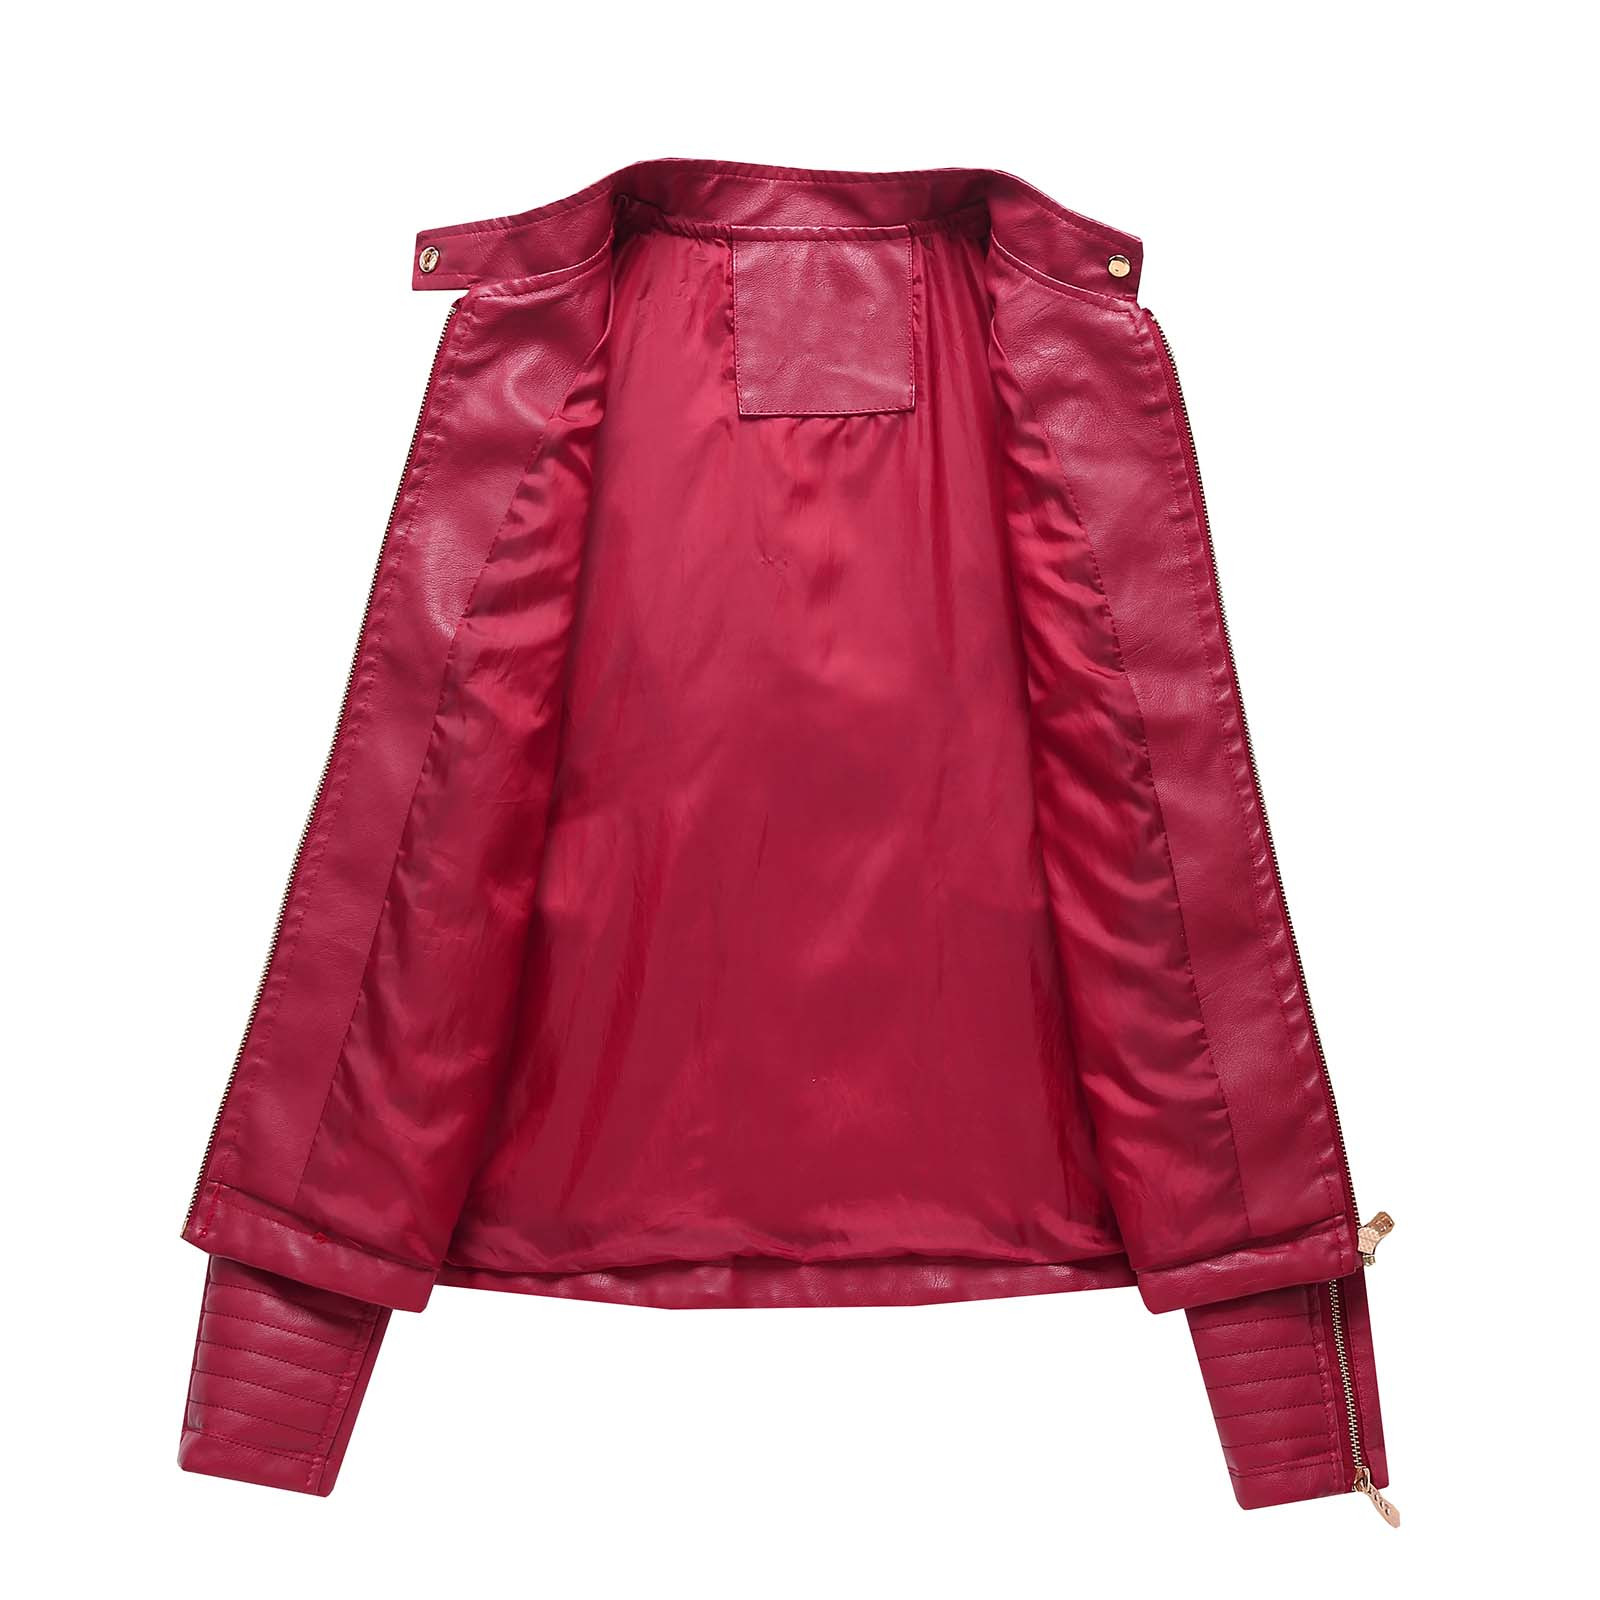 Fanxing Clearance Deals Bomber Leather Jacket Women Fitted Fashion Winter Coats Long Sleeve Full Zip Outwear Stand Collar Motorcycle Jackets - image 5 of 6